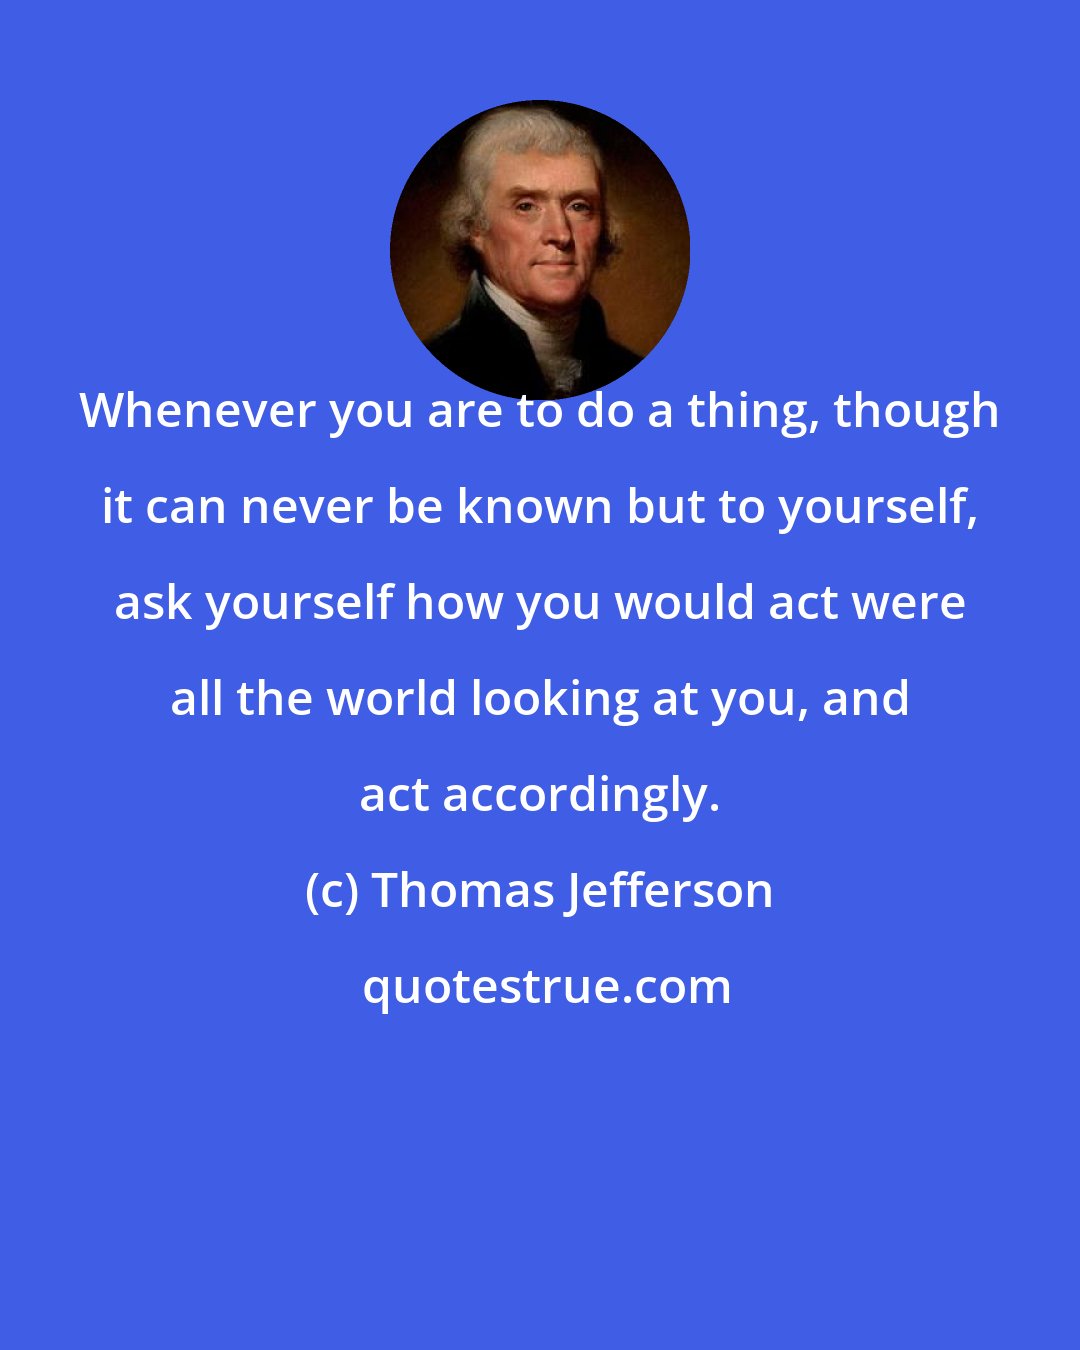 Thomas Jefferson: Whenever you are to do a thing, though it can never be known but to yourself, ask yourself how you would act were all the world looking at you, and act accordingly.